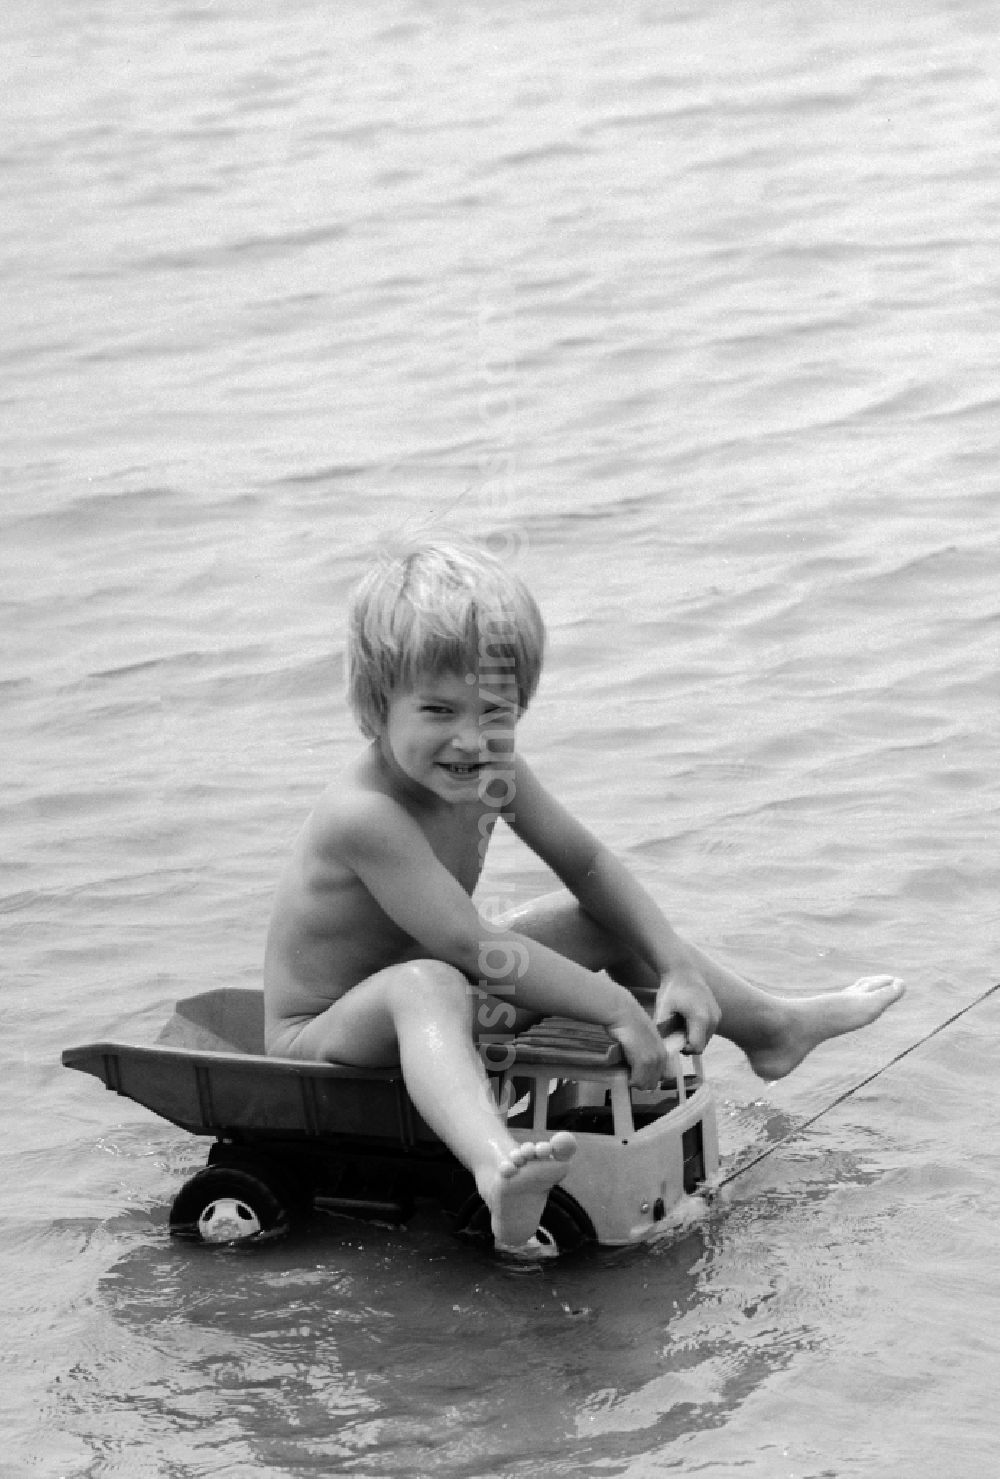 GDR image archive: Teupitz - Boy on a plastic truck in water at Teupitzer lake in Teupitz in Brandenburg on the territory of the former GDR, German Democratic Republic